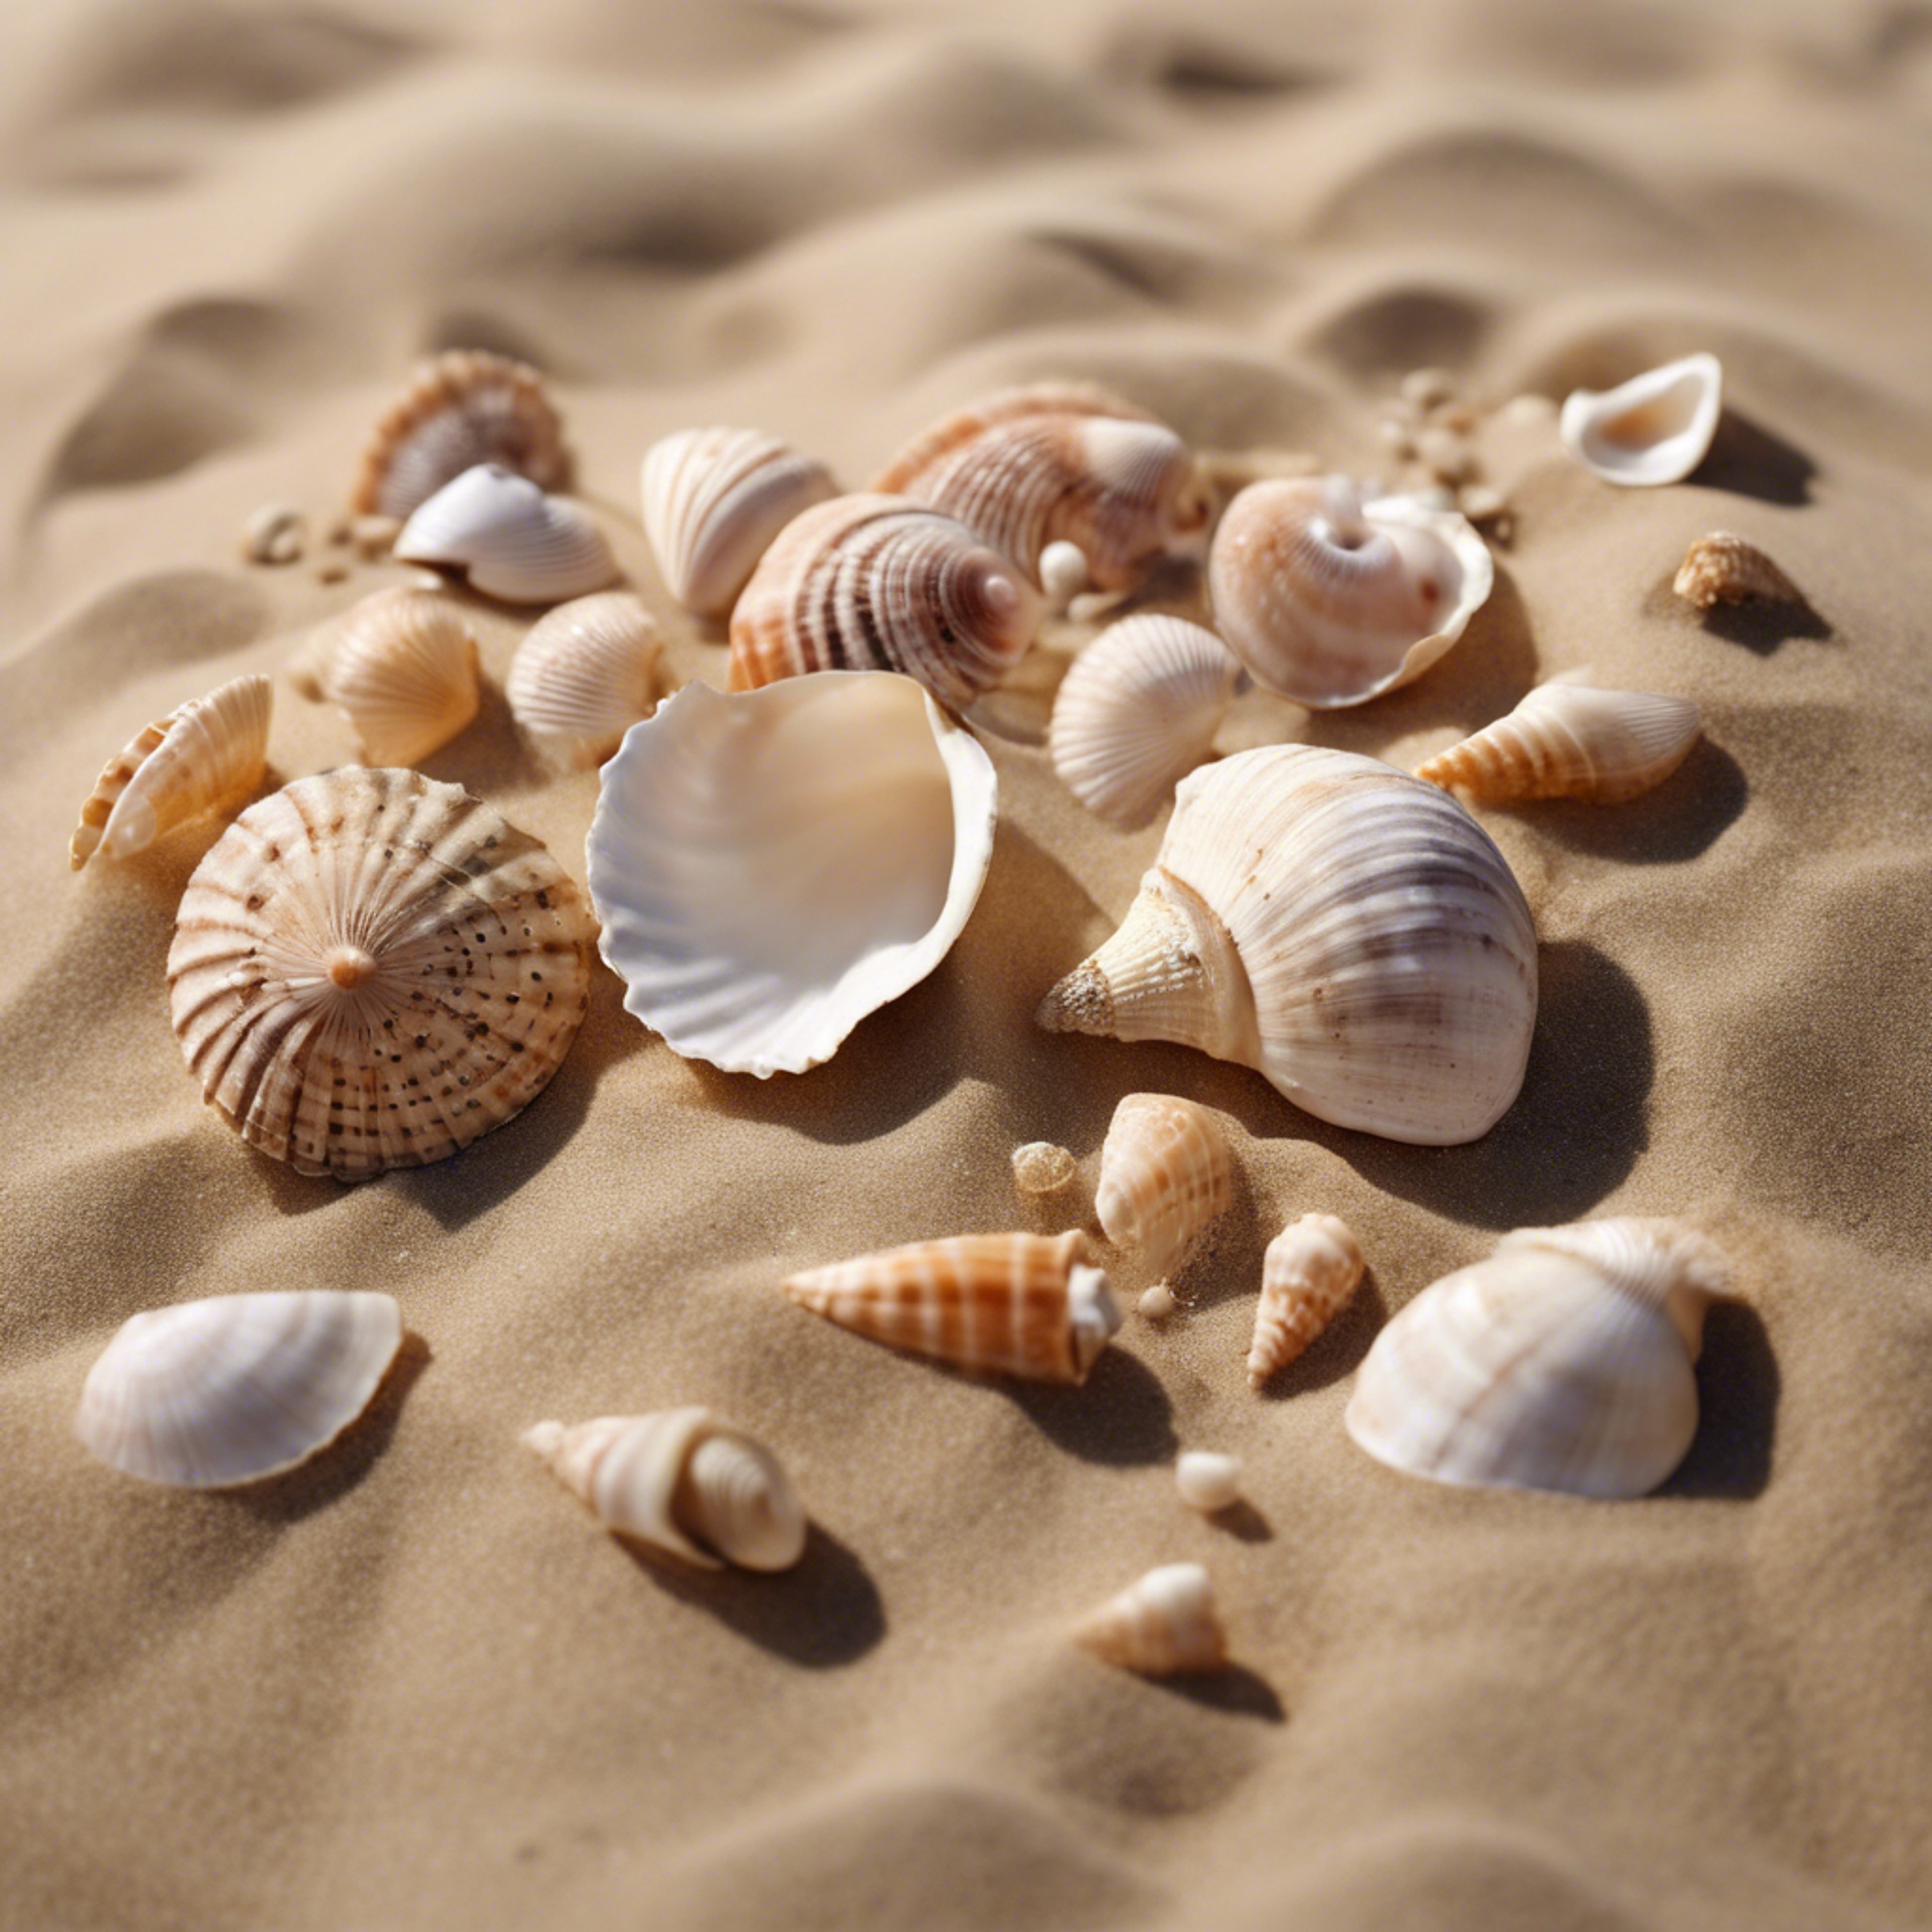 An arrangement of seashells of various sizes in a cool beige sand.壁紙[d4509fc1f43d45f6bba6]